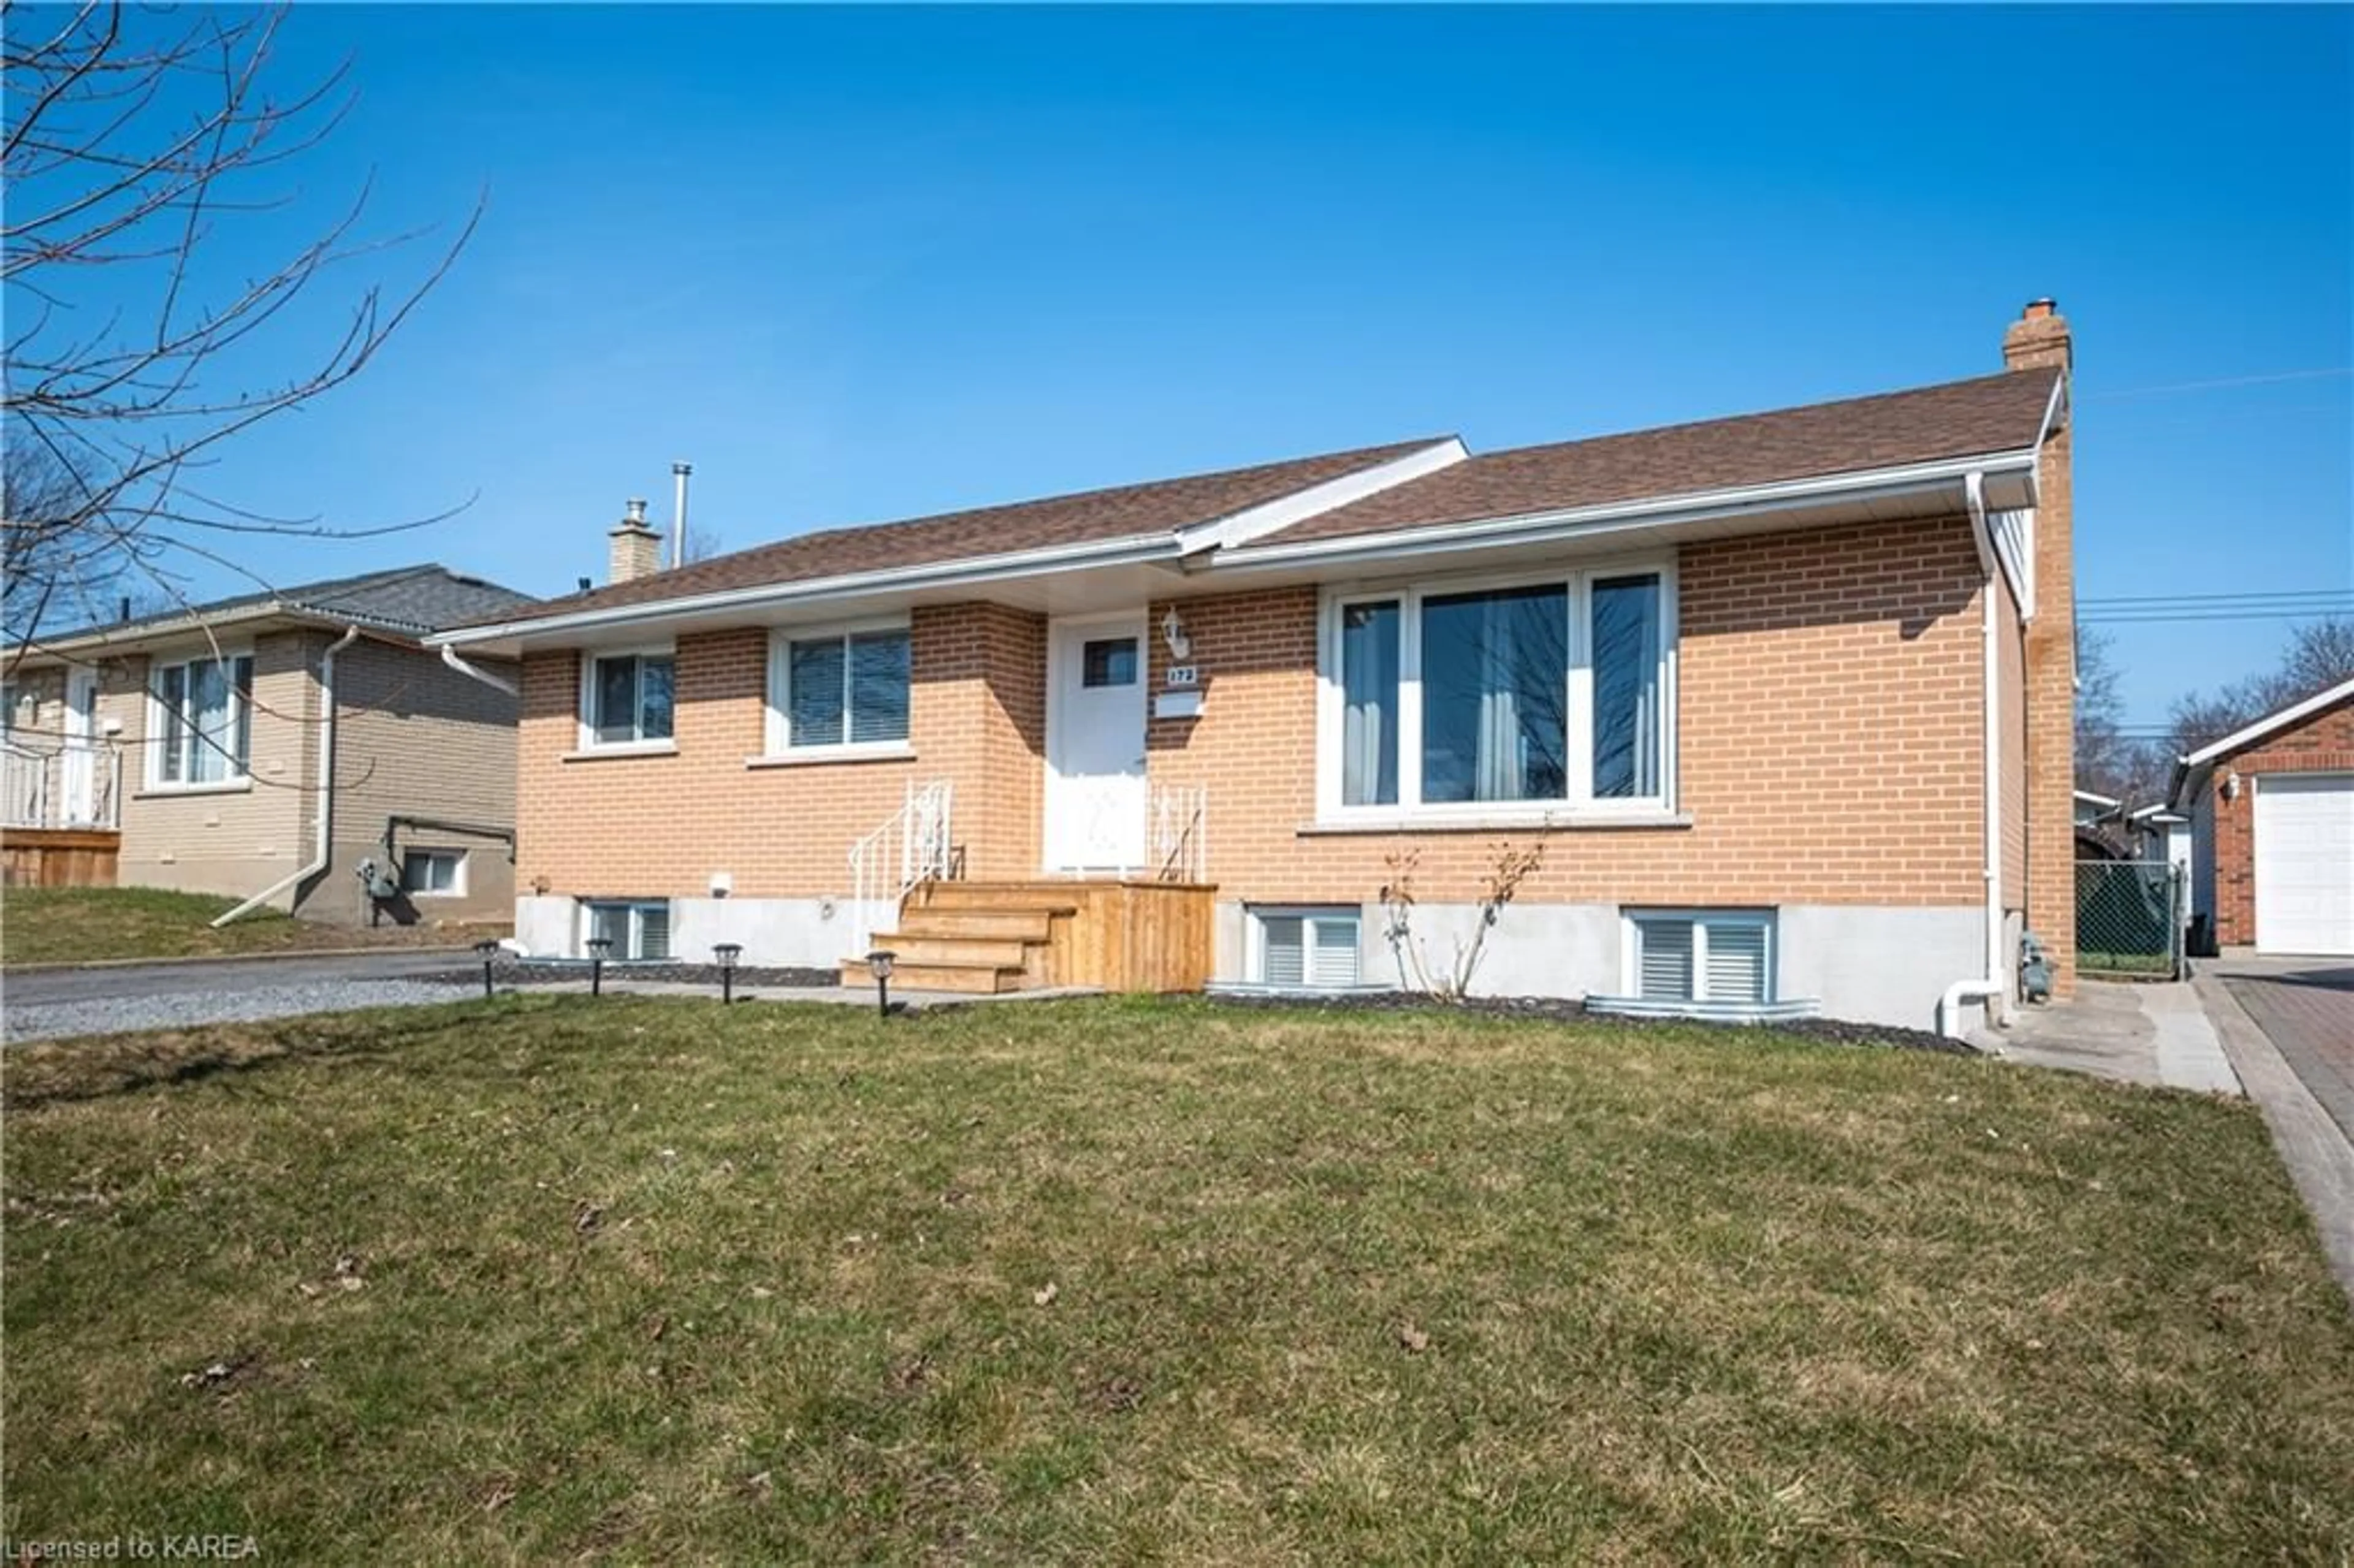 Home with unknown exterior material for 172 Morenz Cres, Kingston Ontario K7K 2X3